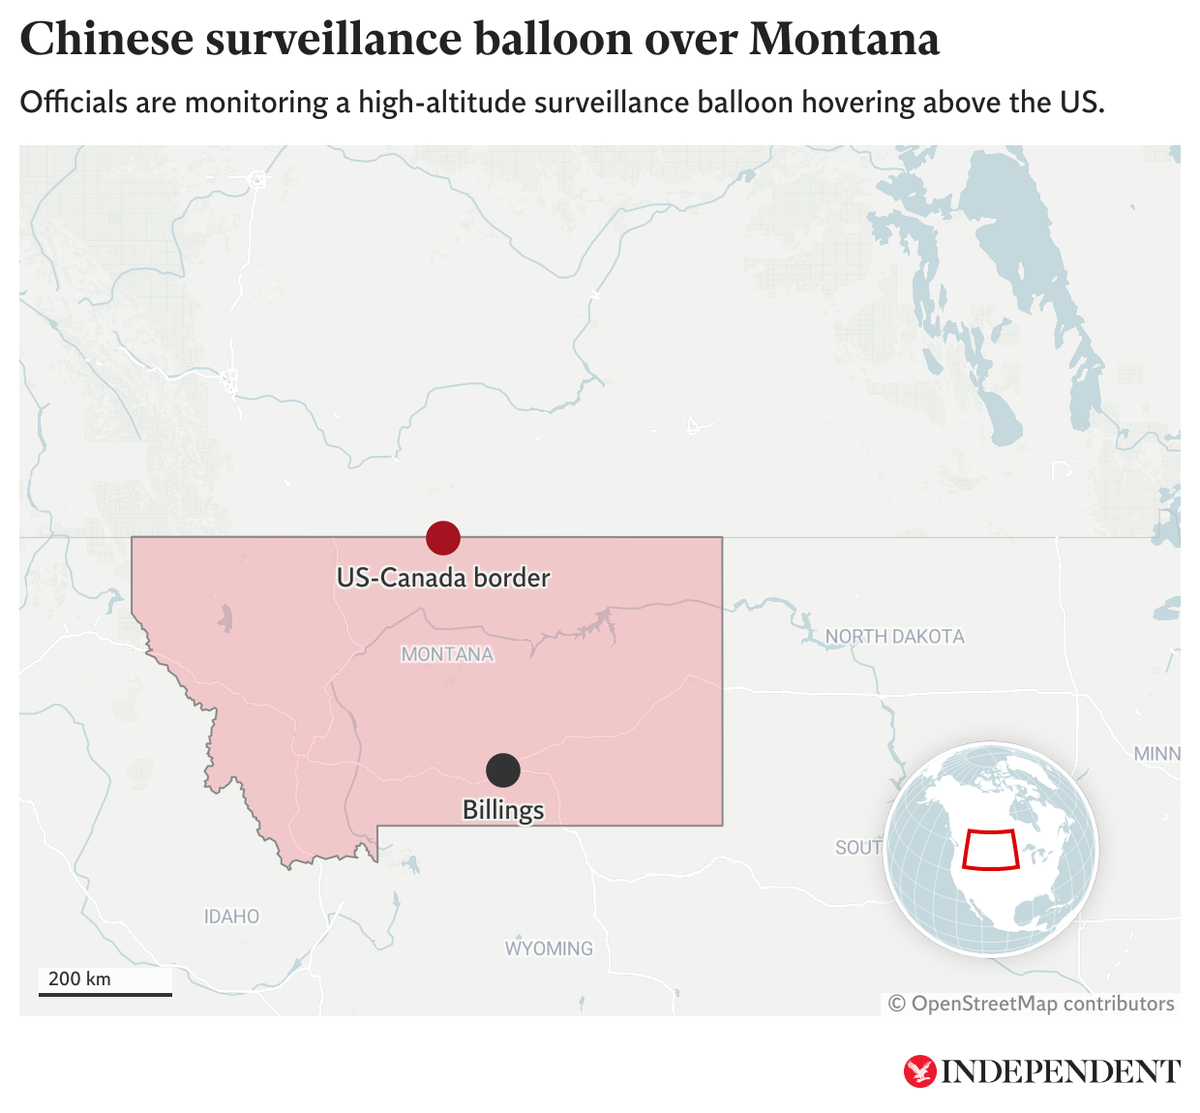 Where is the Chinese ‘spy’ balloon now? 